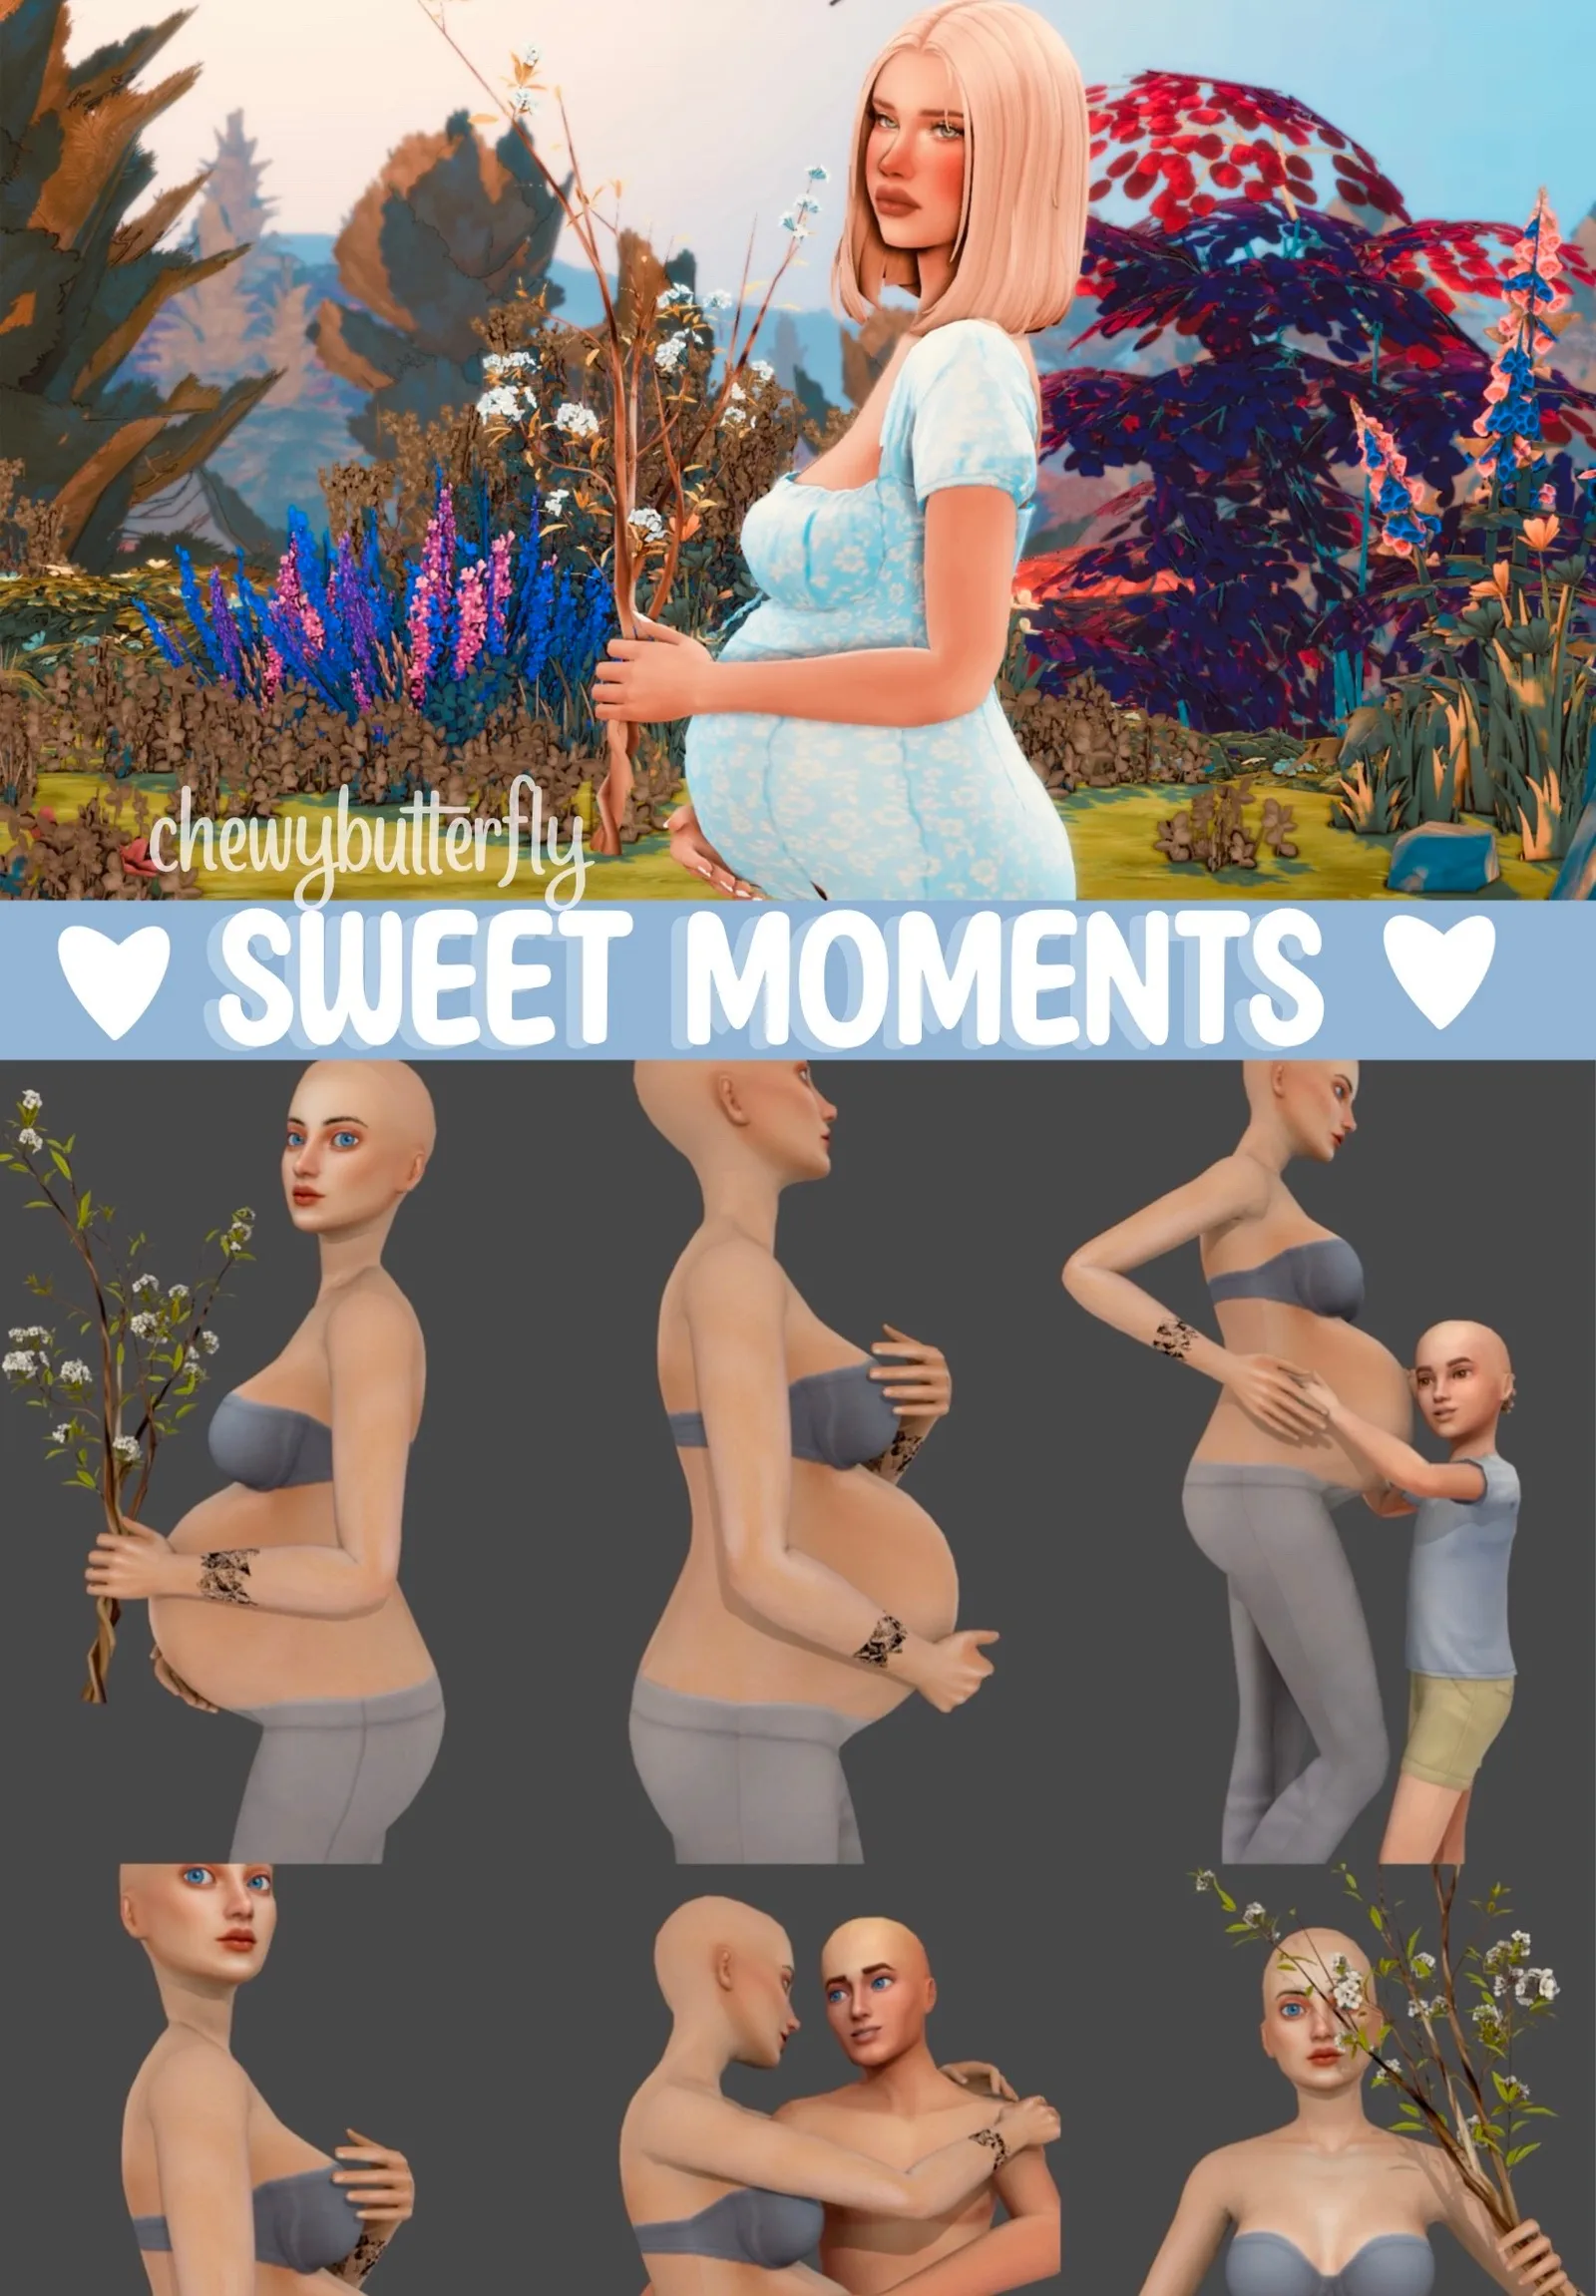 Sweet moments poses